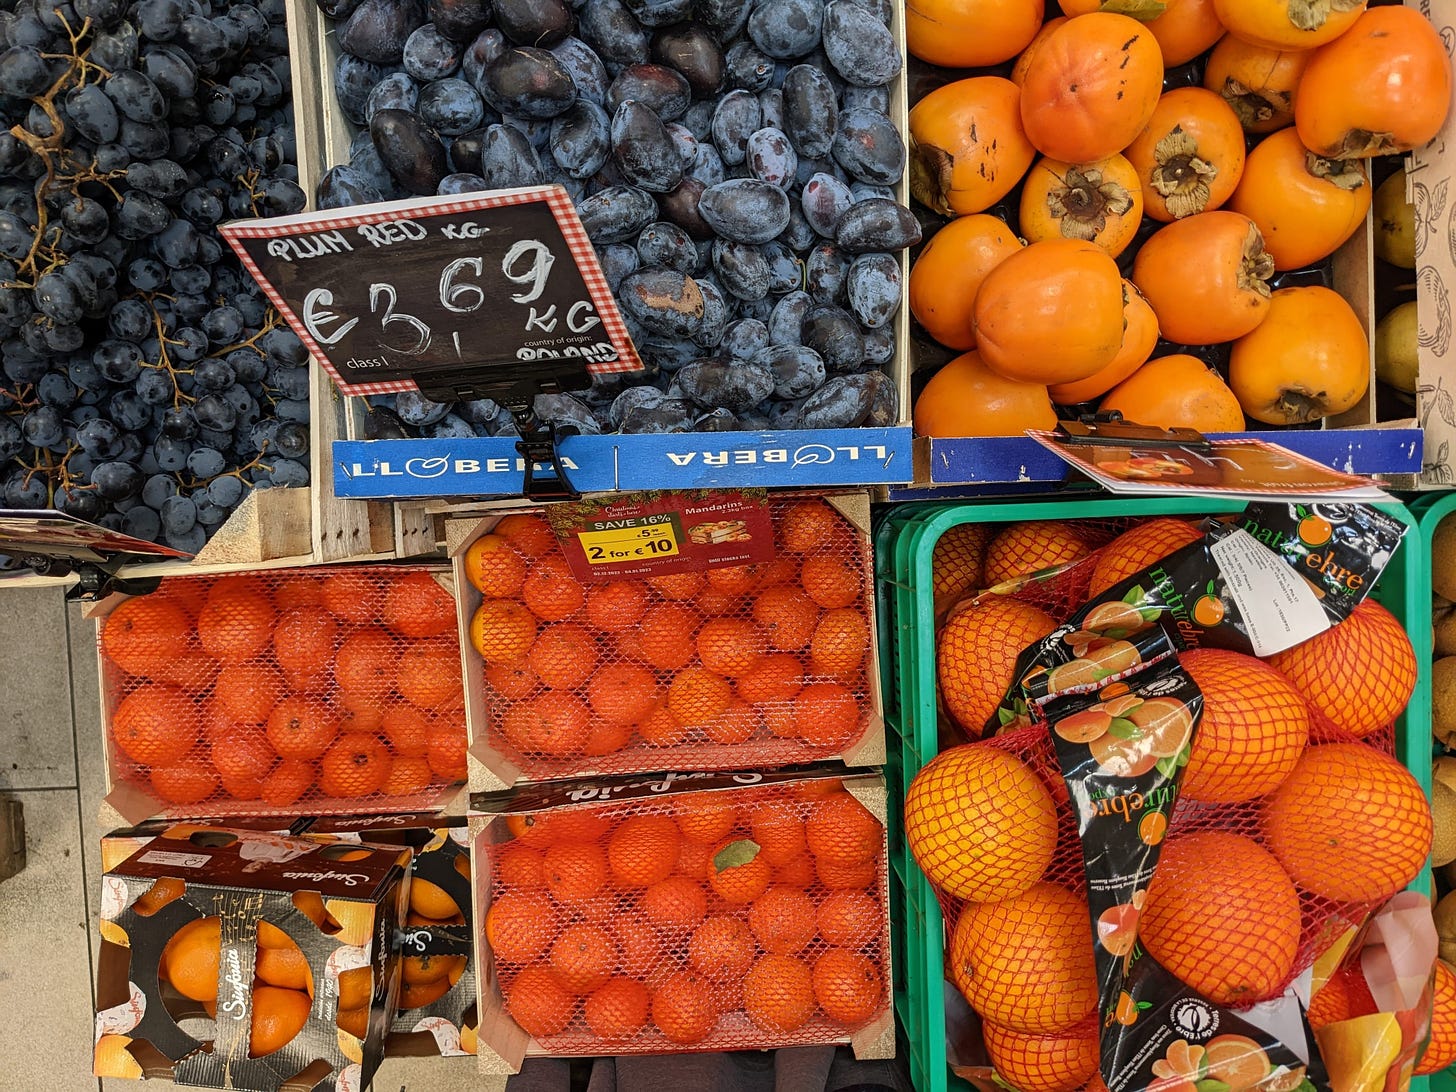 plums, oranges, and persimmons in crates